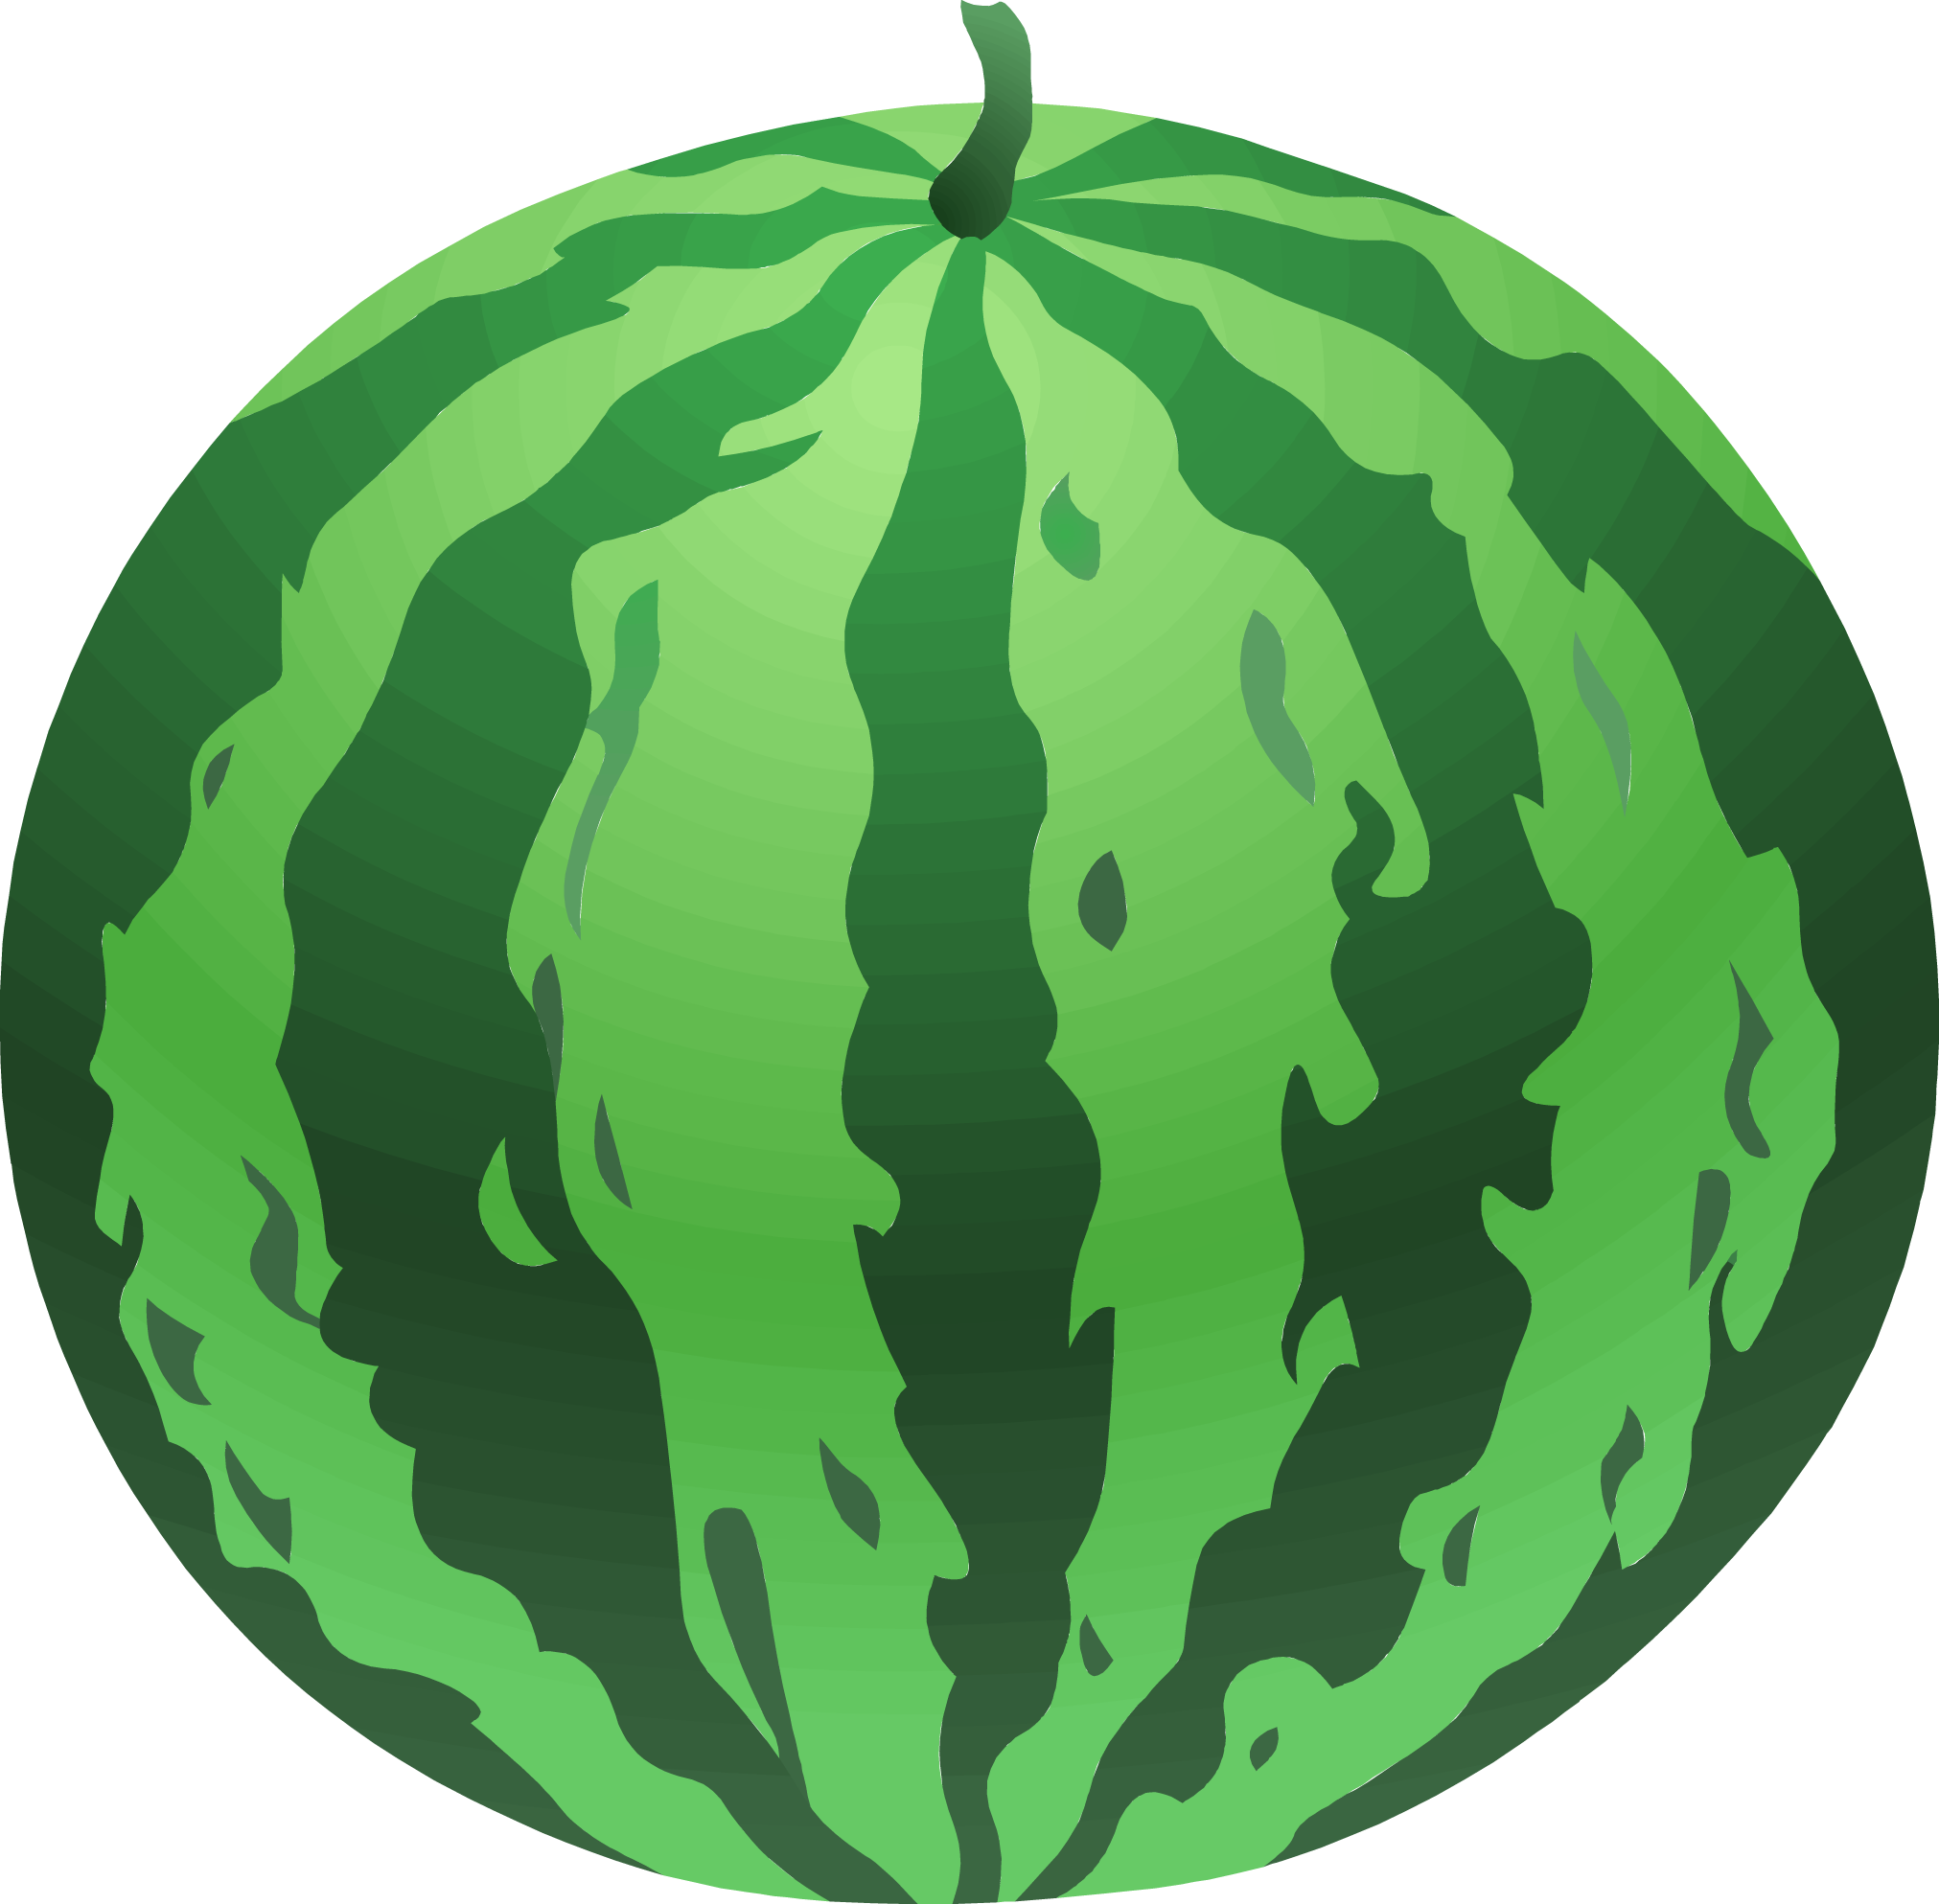 watermelon-images-free-download-clip-art-cliparting